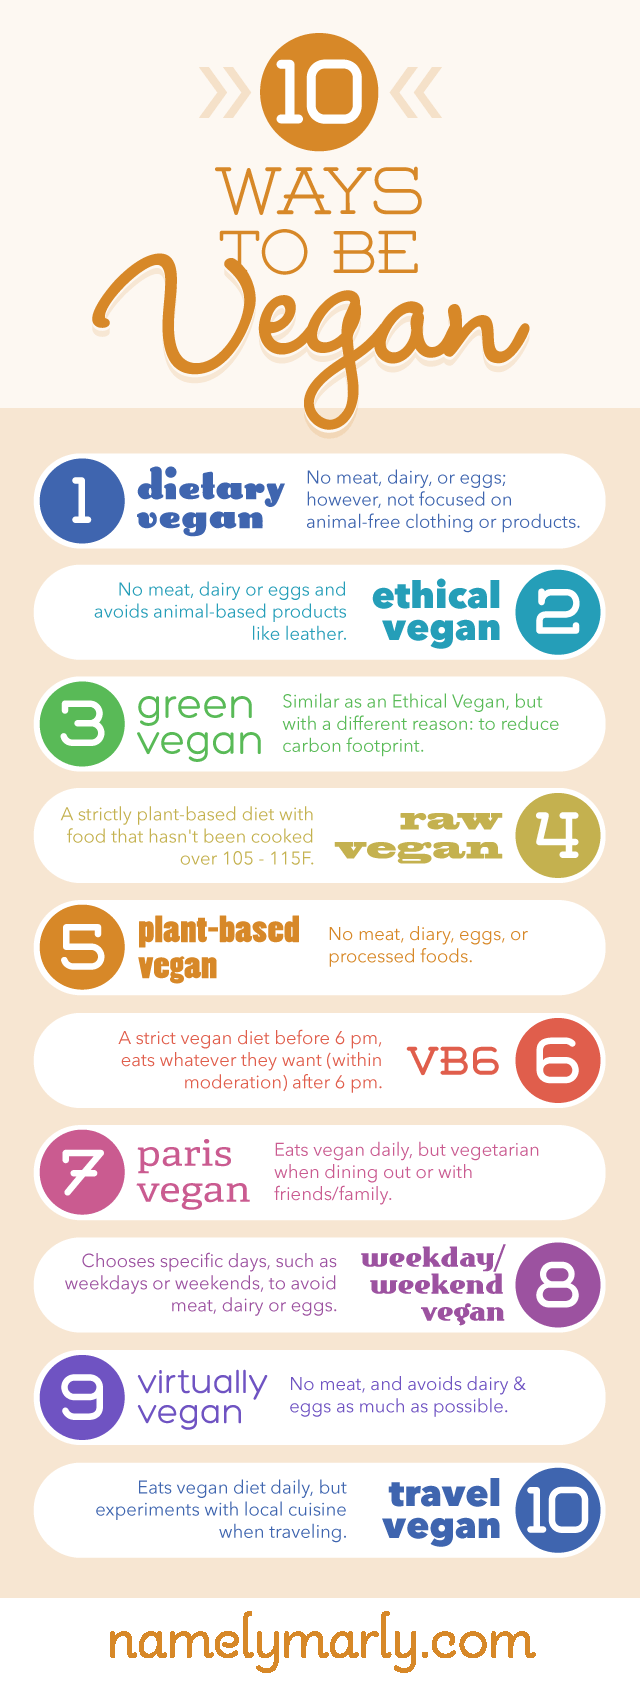 10 Ways to Be Vegan Infographic by namelymarly.com